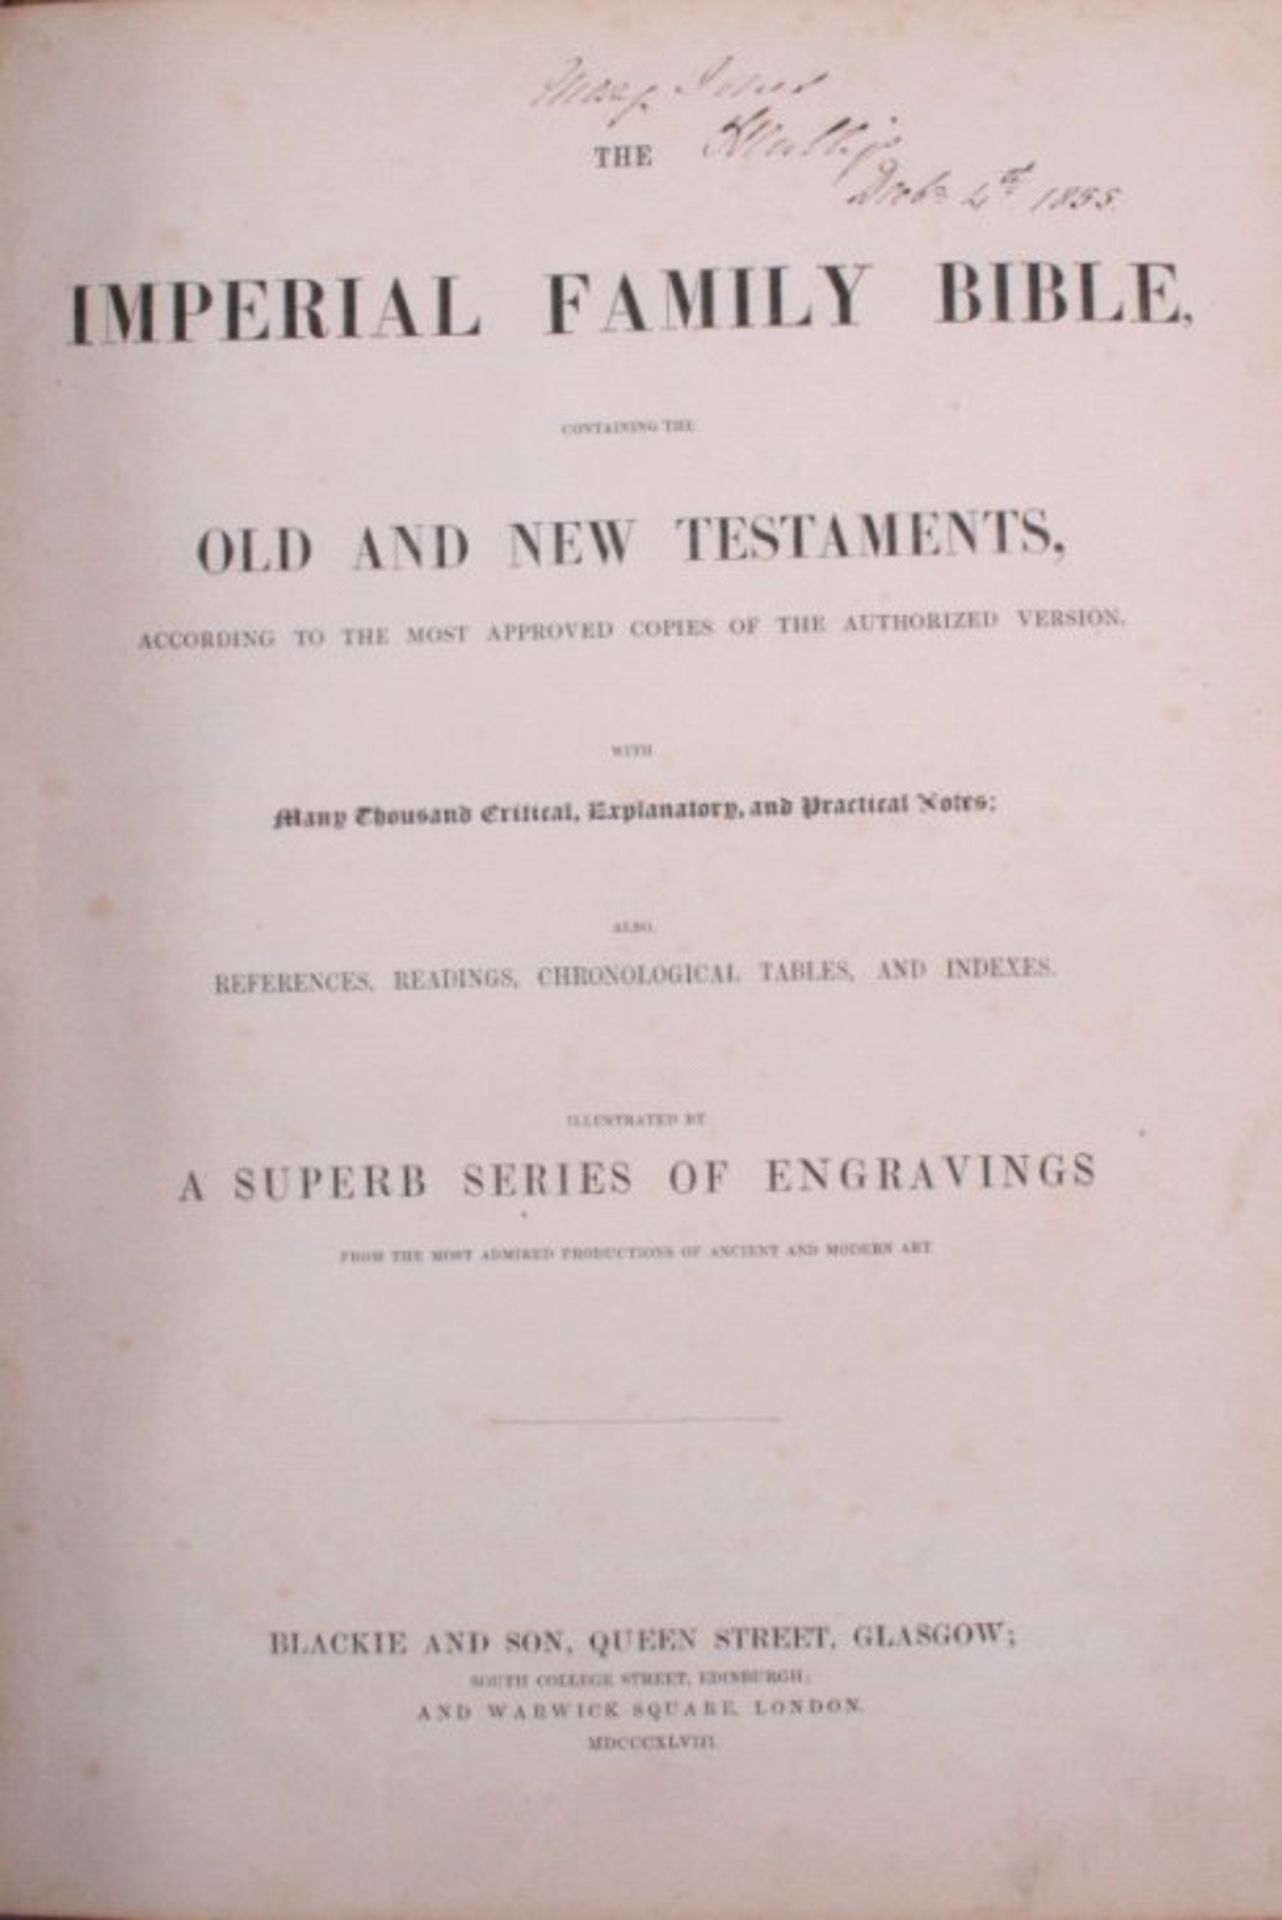 Holly Bibel, London 1848Imperial Familiy Bible, containing the old and newTestaments. Vollständig